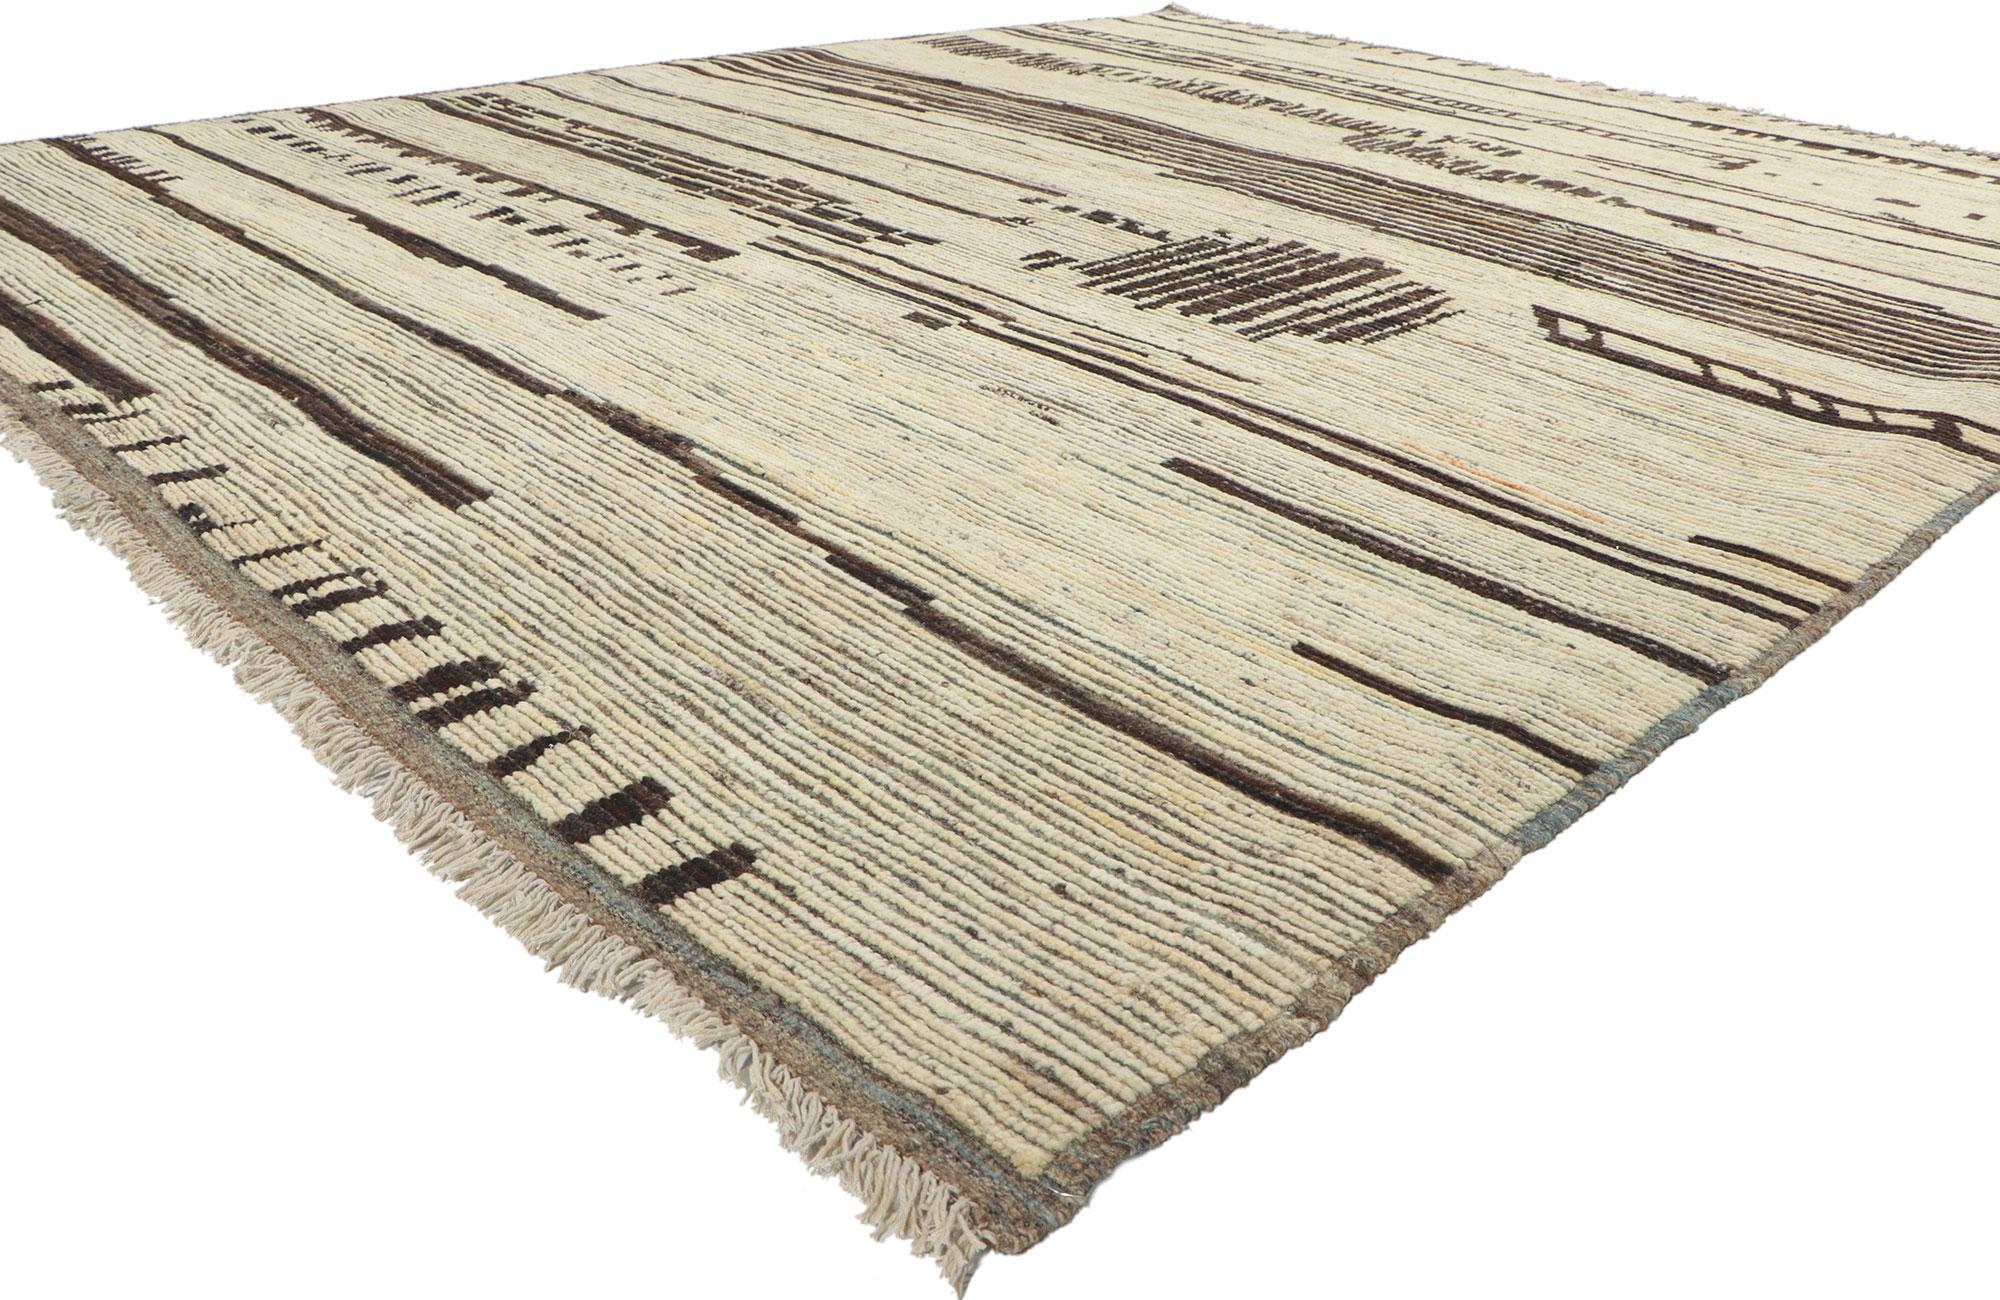 80951 new Contemporary Moroccan rug inspired by Gunta Stolz and Bauhaus Style, 08'04 x 10'00. ?Showcasing an abstract linear design, incredible detail and texture, this hand knotted wool contemporary Moroccan area rug is a captivating vision of